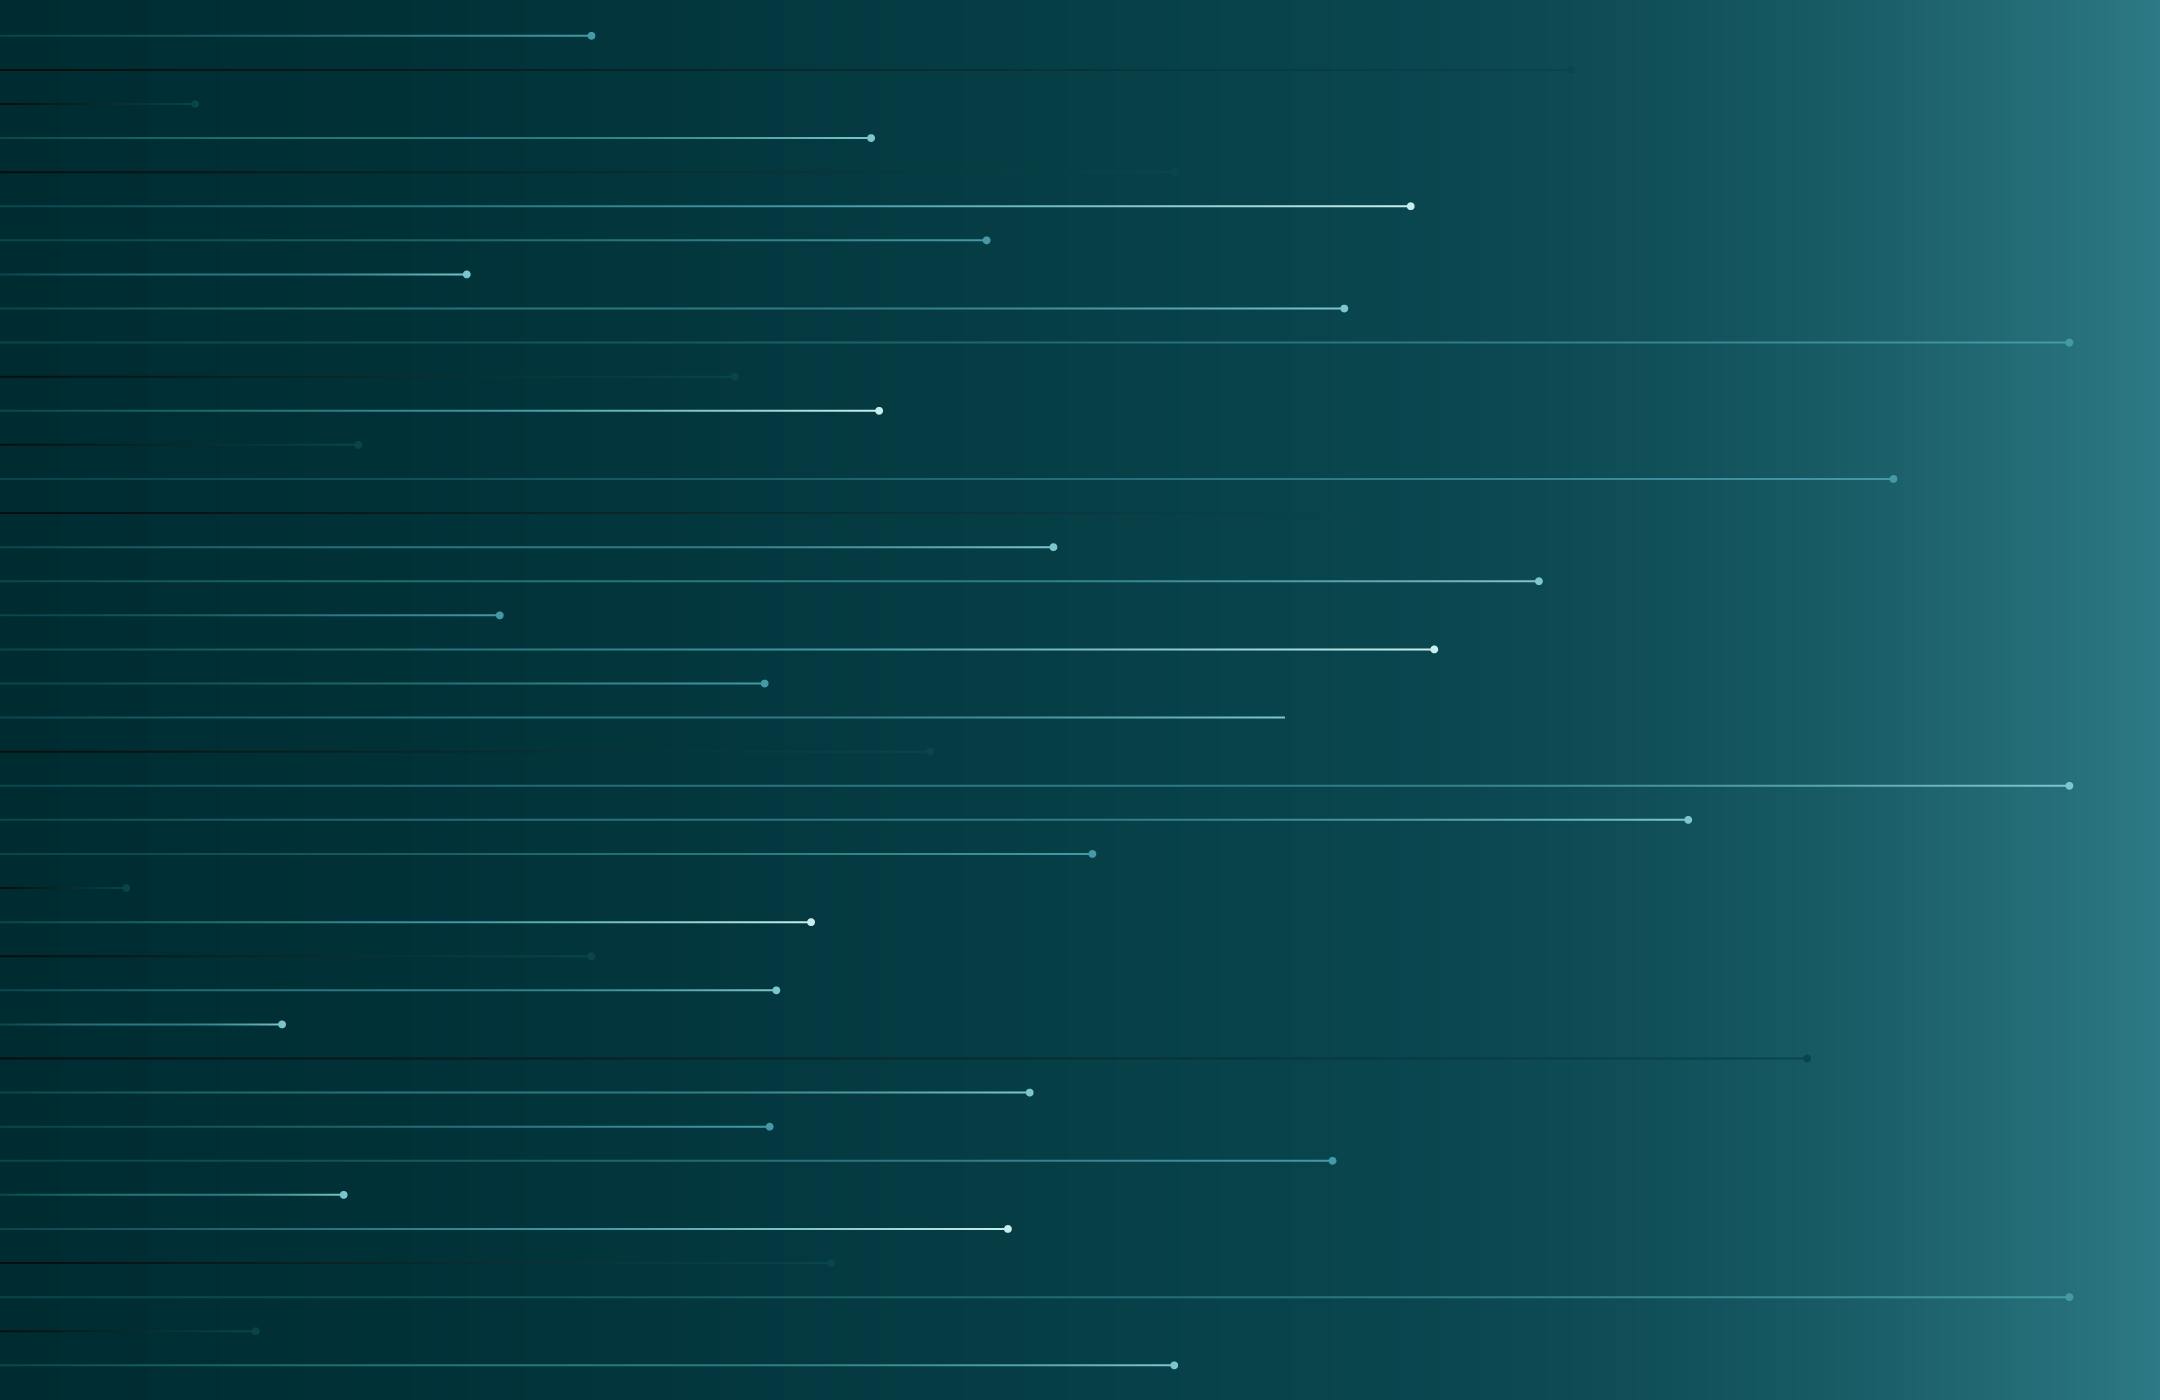 Graphic of lines implying motion on a teal background